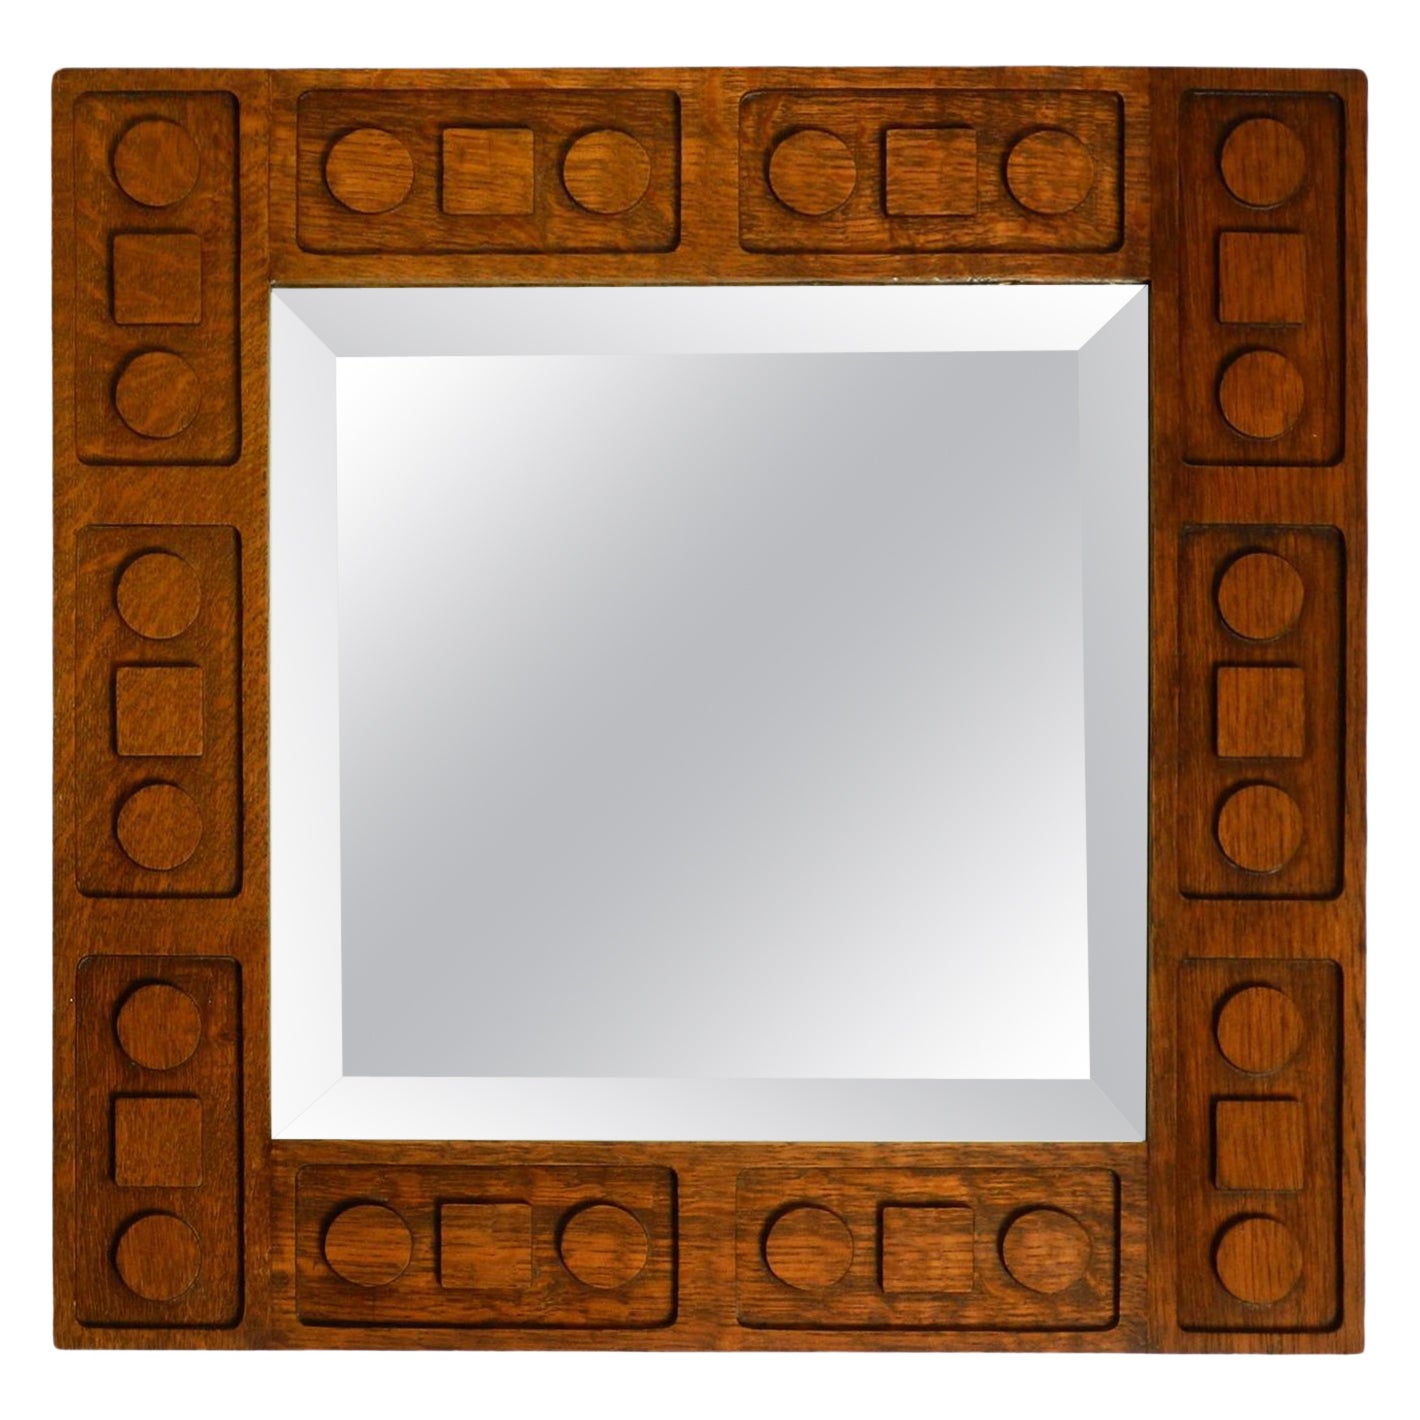 Beautiful extraordinary 1930s Art Deco wall mirror made of oak For Sale